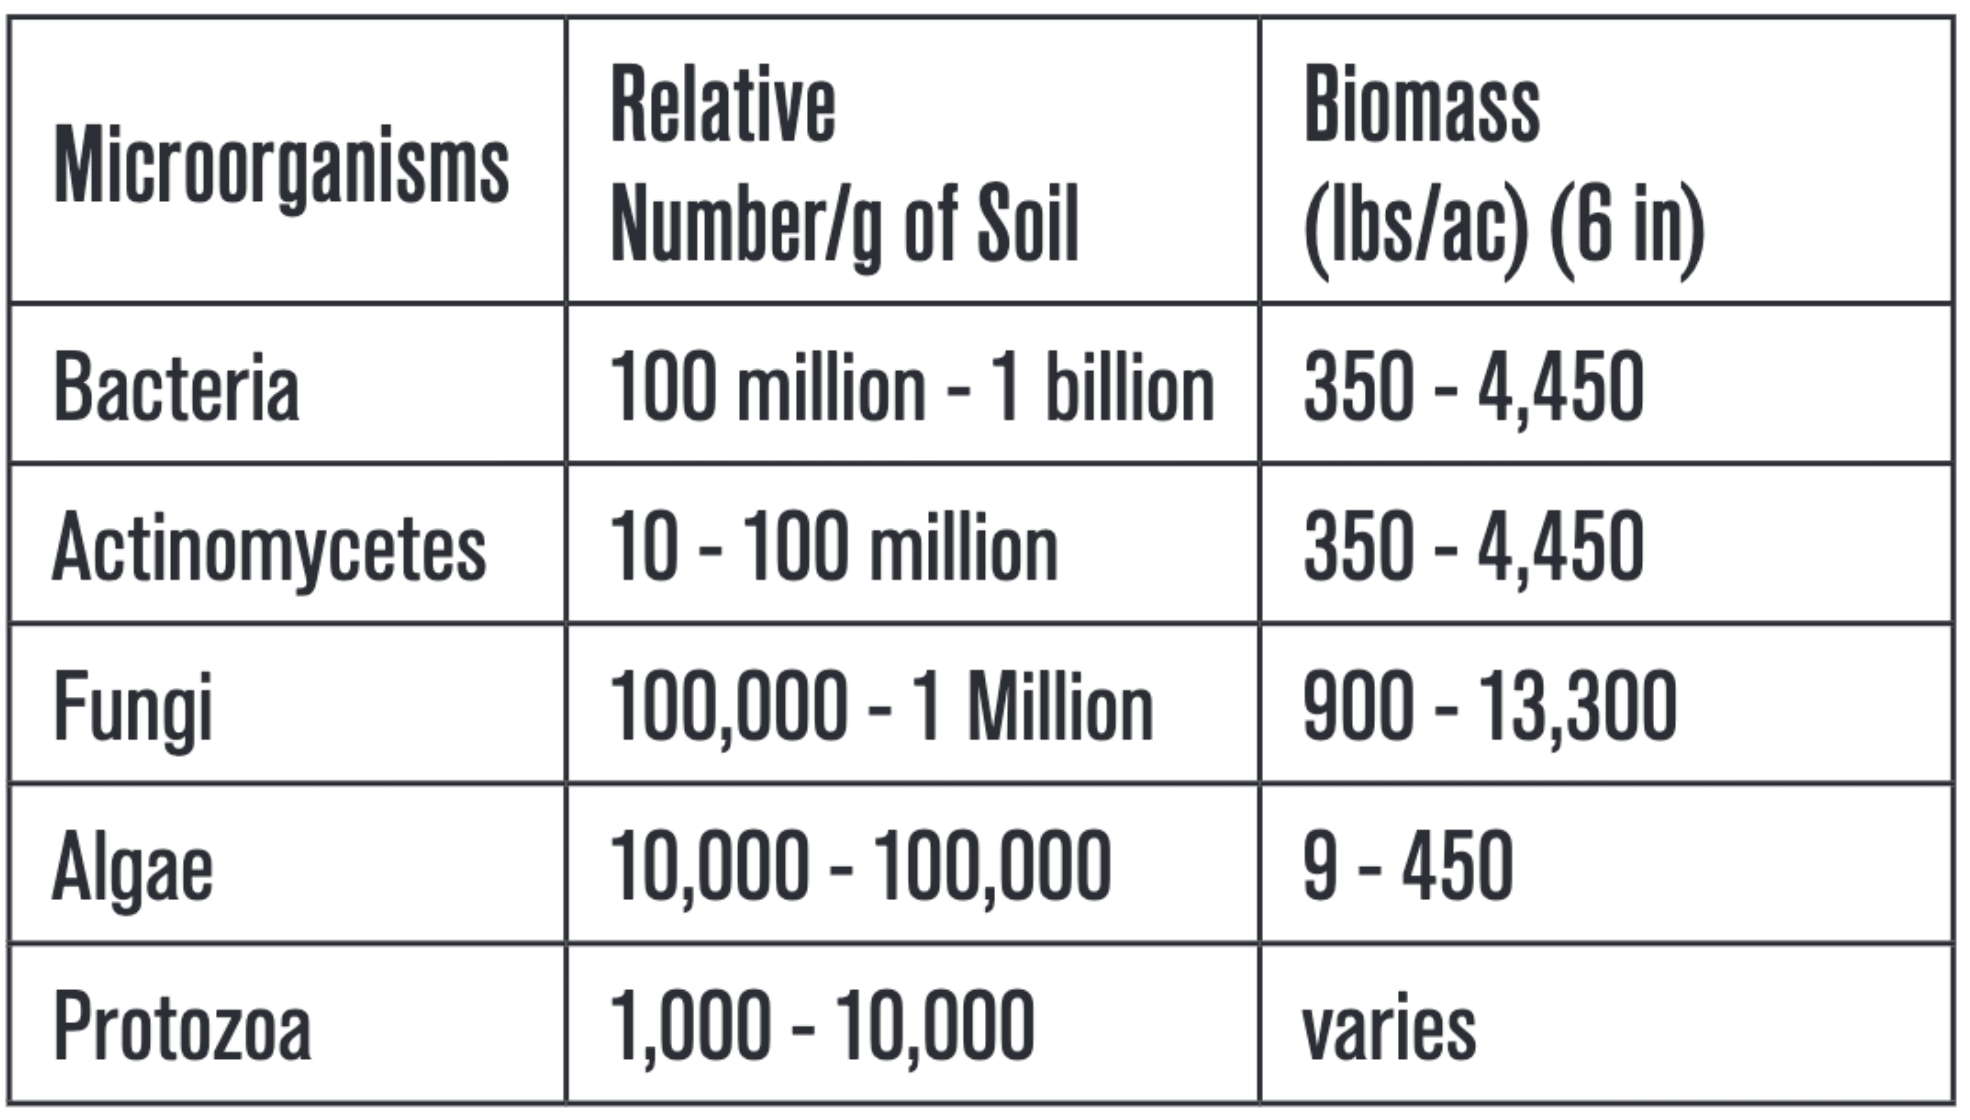 Relative Number and Biomass of Microbial Species in the Soil